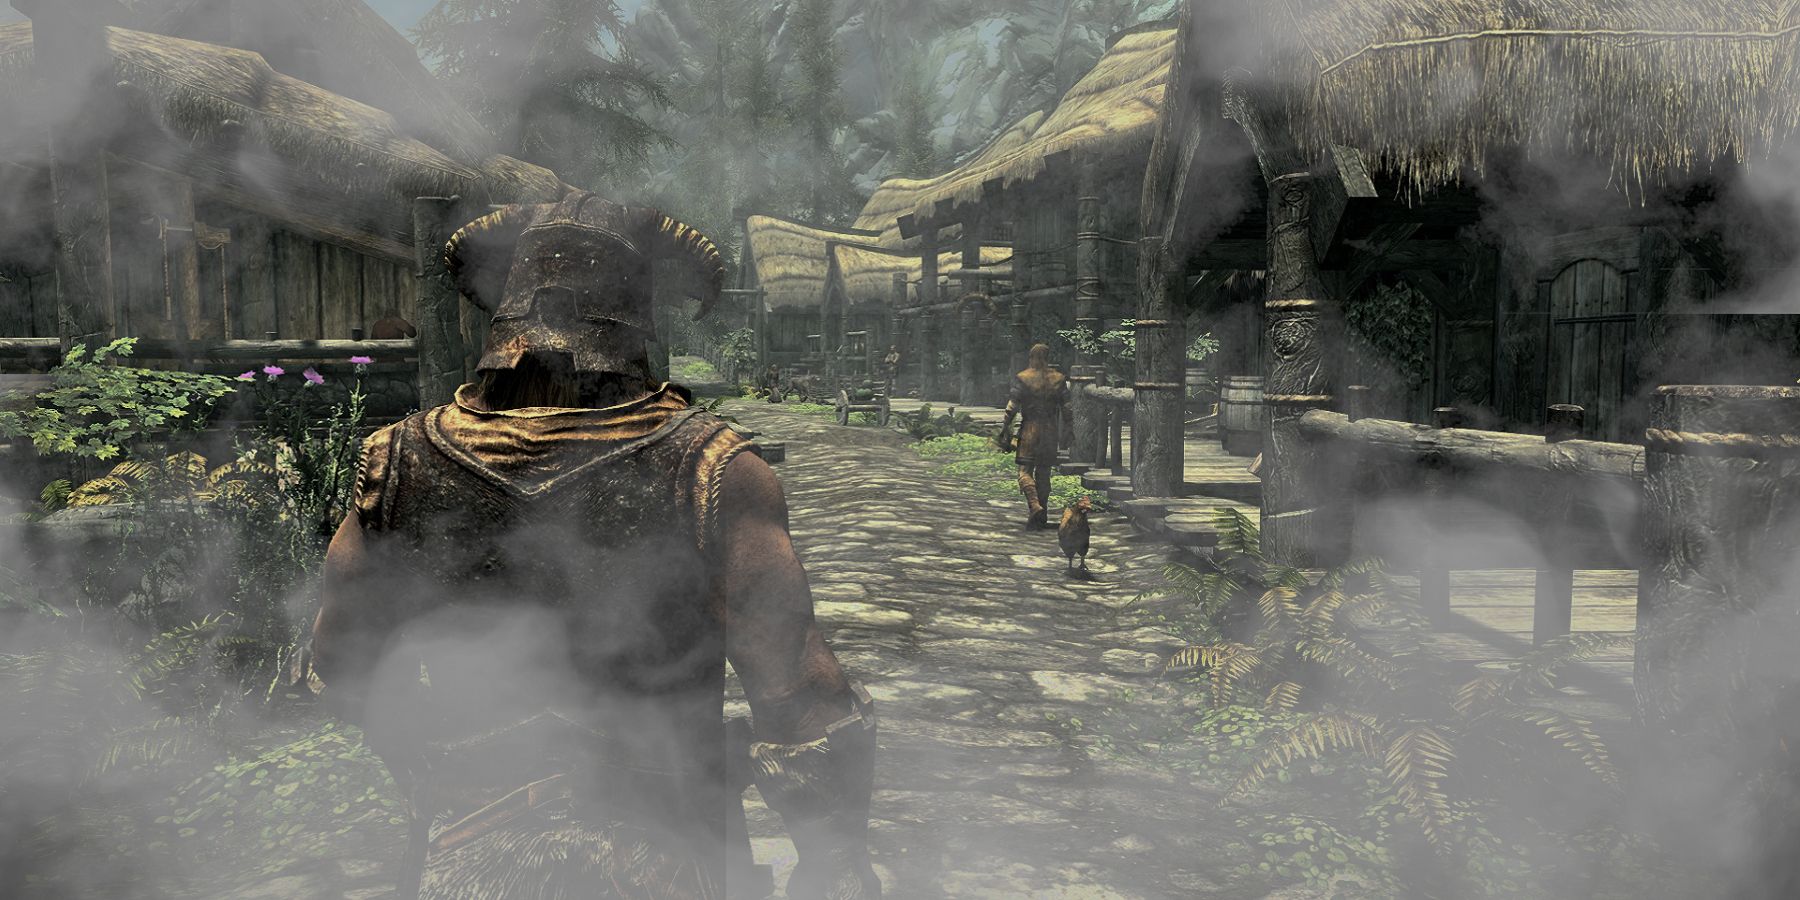 Image from The Elder Scrolls 5: Skyrim showing the player walking through a very foggy Whiterun.